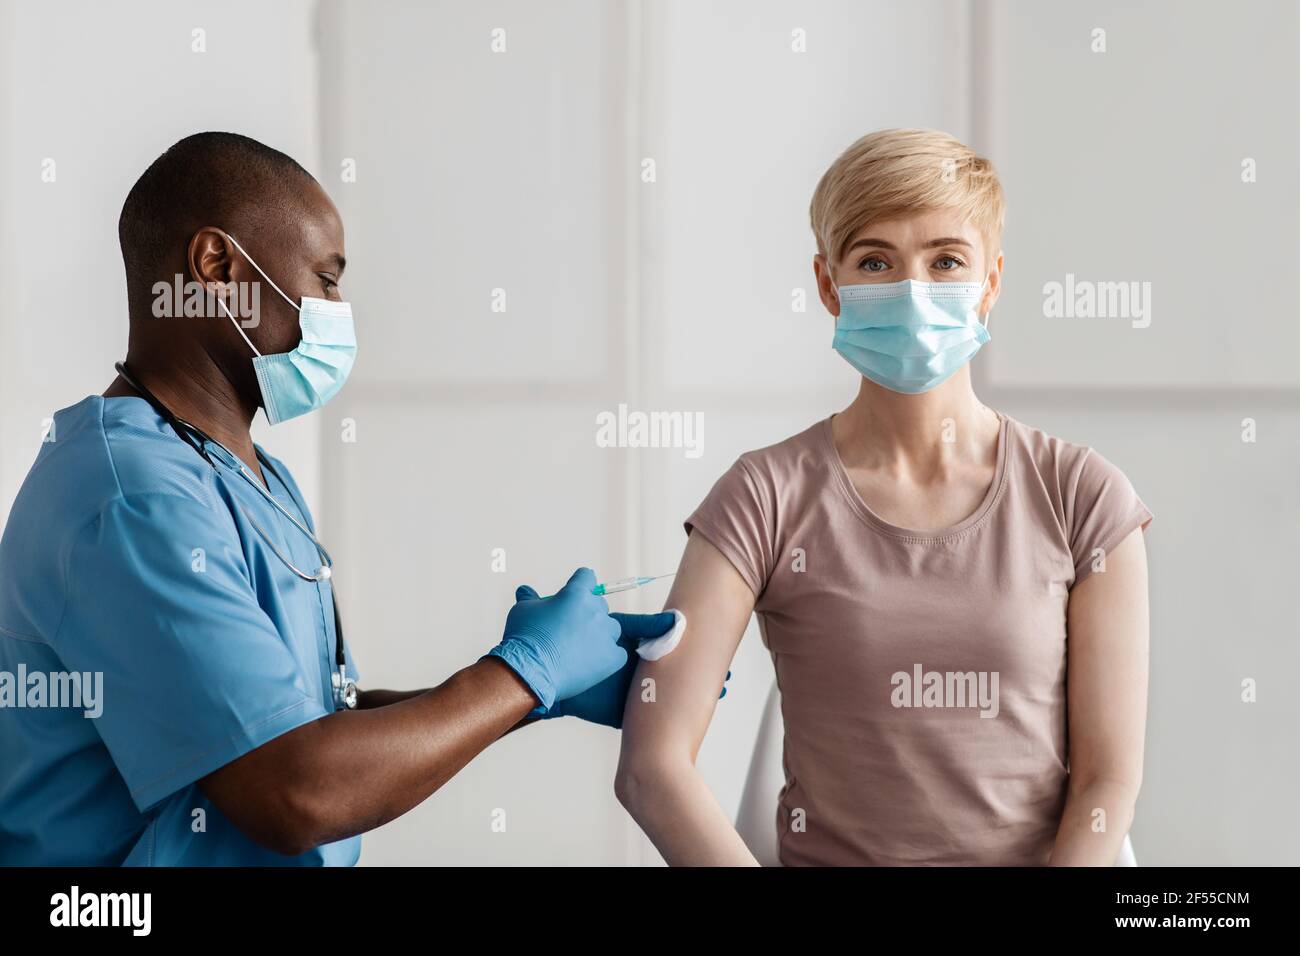 Vaccination, immunization, disease prevention. Adult lady in mask gets covid-19 or flu vaccine Stock Photo